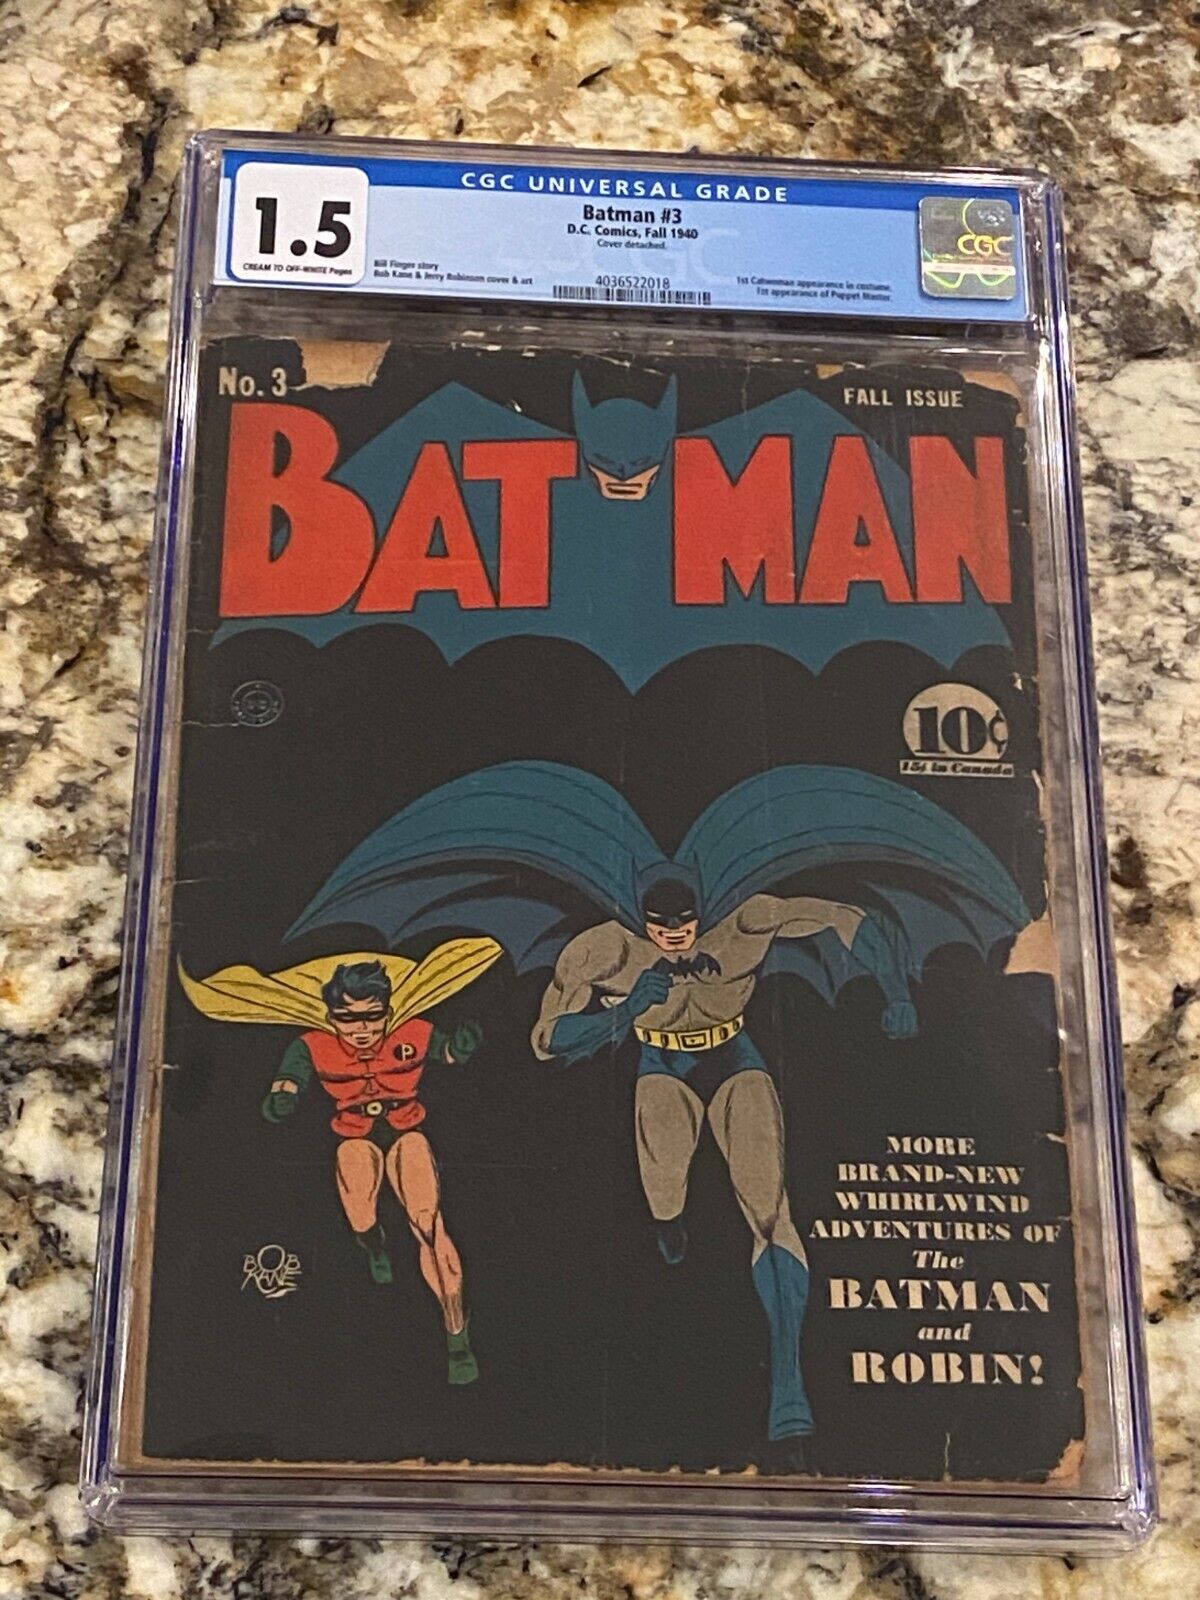 BATMAN #3 CGC 1.5 1ST CATWOMAN IN COSTUME GOLDEN AGE KEY ICONIC BOB KANE COVER